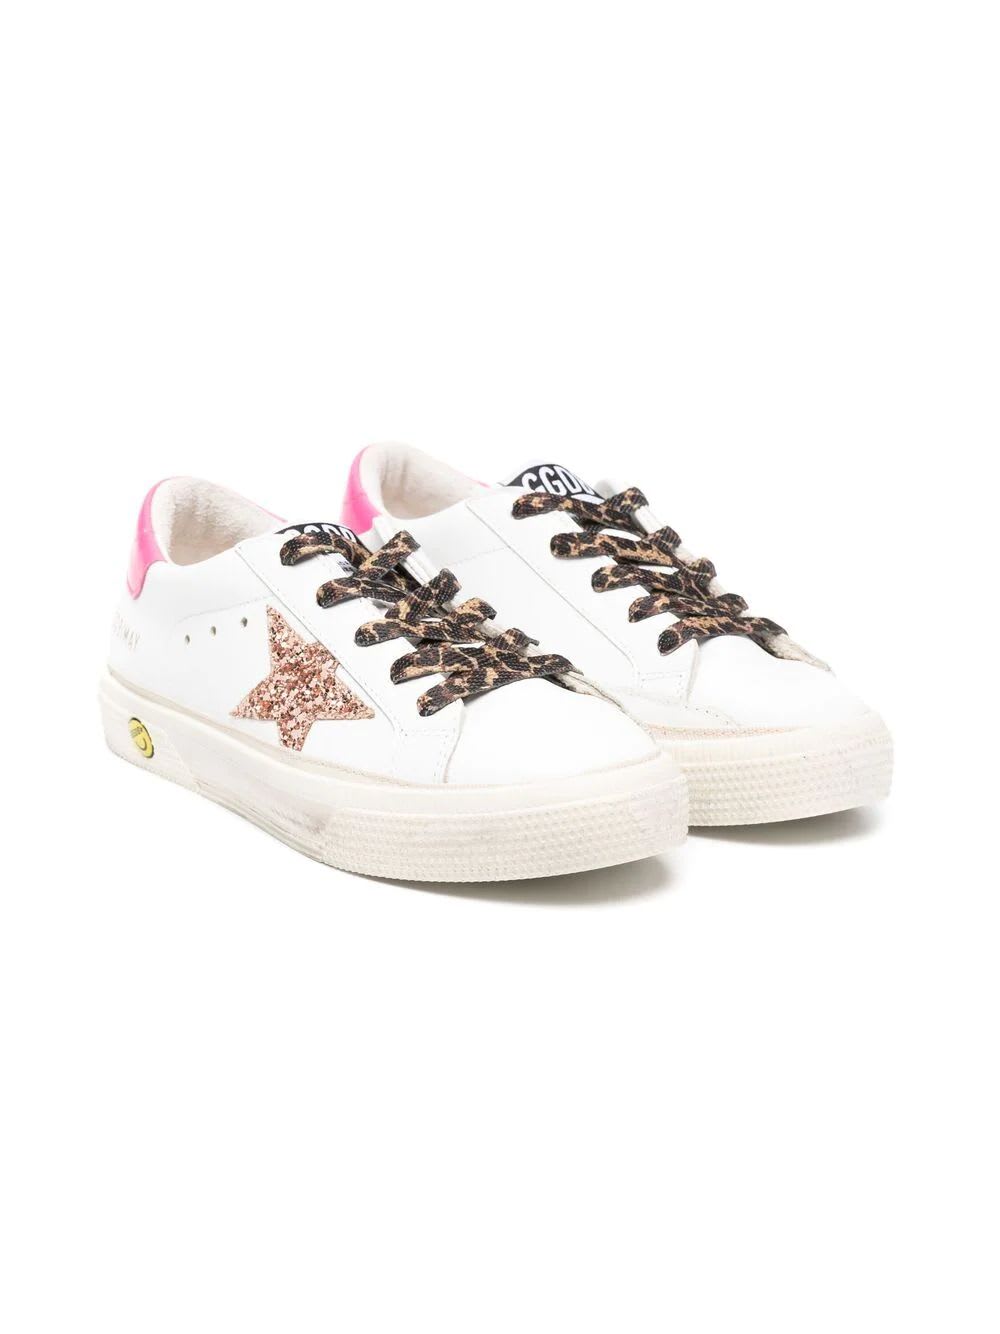 GOLDEN GOOSE KID WHITE SUPER-STAR SNEAKERS WITH FUCHSIA SPOILER, LEOPARD LACES AND PINK GLITTER STAR,GYF00112 F00116610517